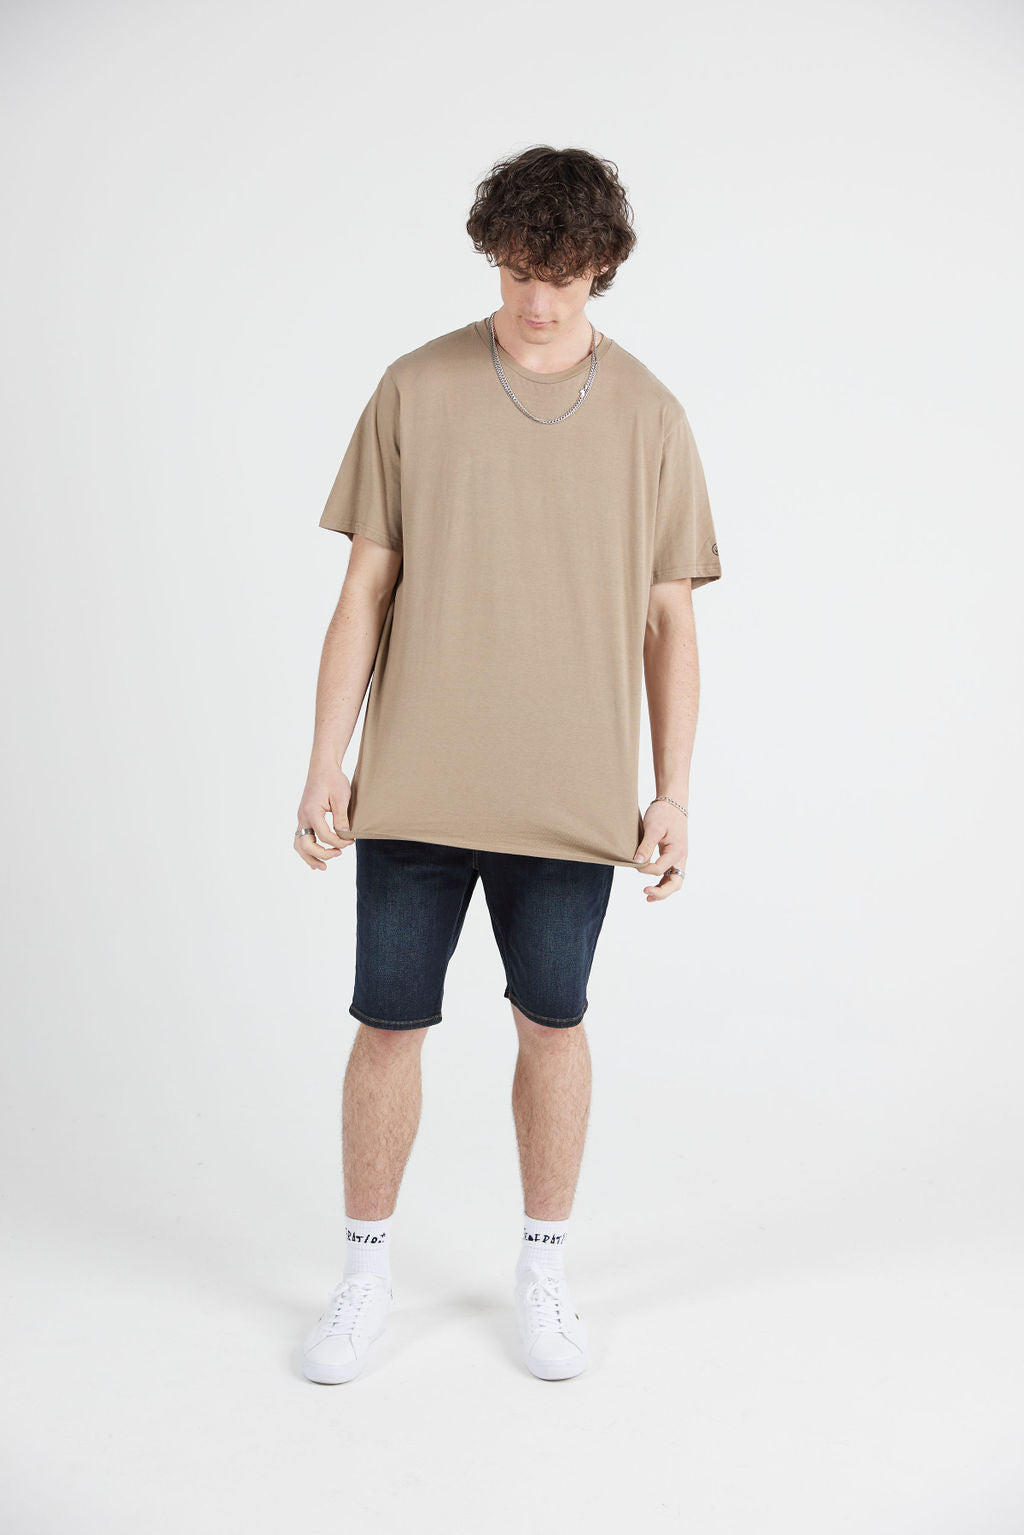 MENS SOLID TEE - DESERT TAUPE (2FOR60)